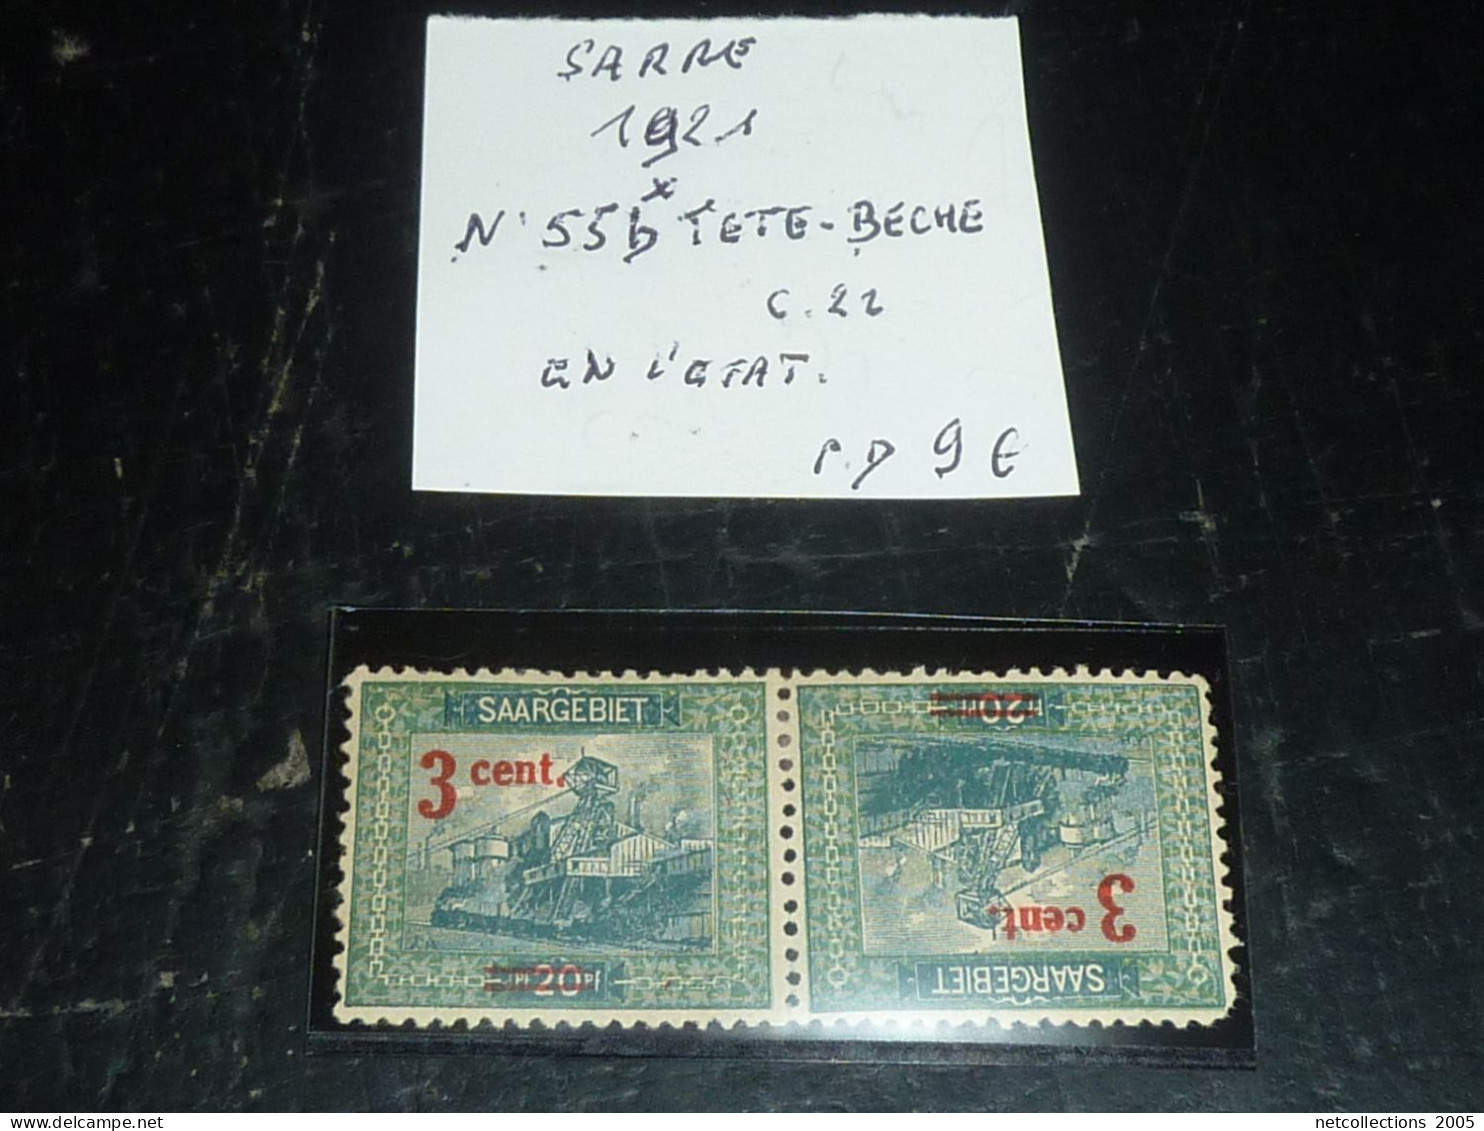 SARRE 1921 N°55b TETE BECHE - NEUF AVEC CHARNIERES (20/09) - Unused Stamps